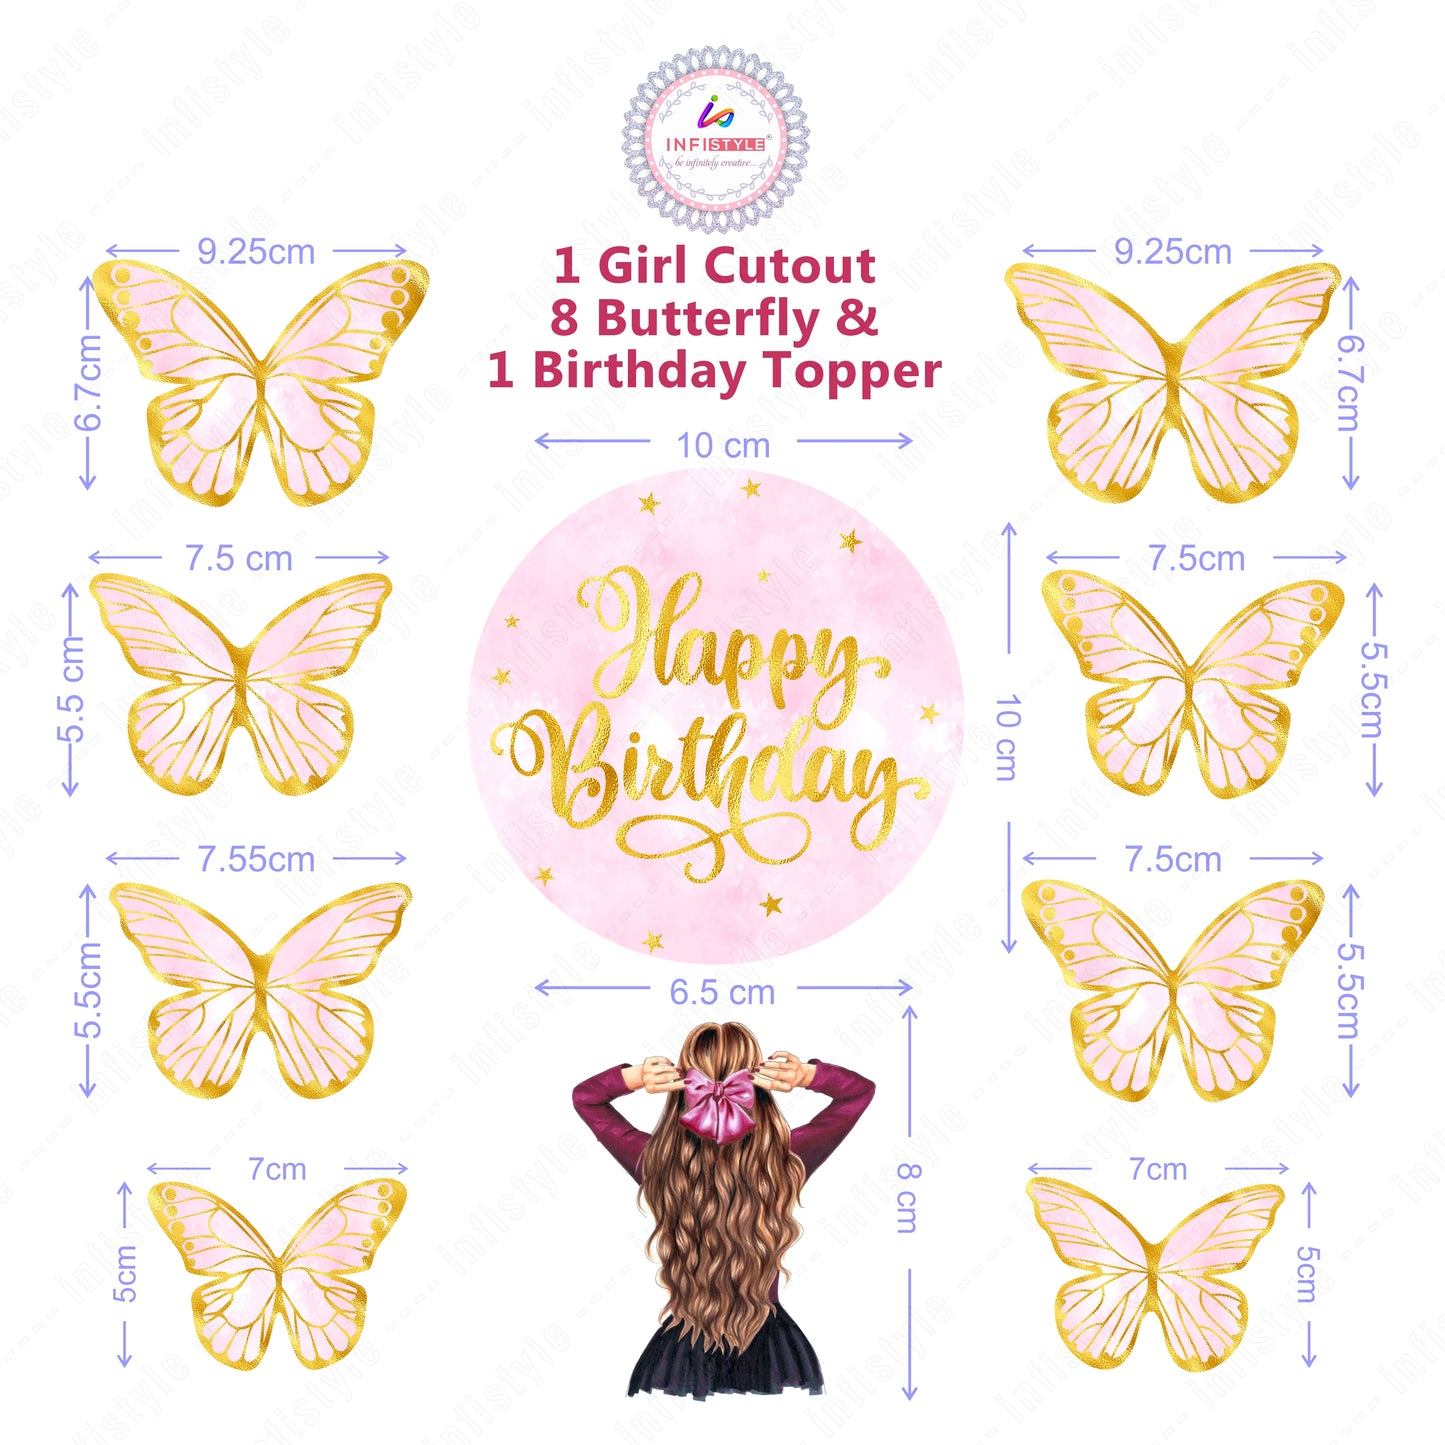 Butterfly Cake Toppers 8 Butterfly 1 Happy Birthday 1 Die Cut Cake Topper (PCT-02)